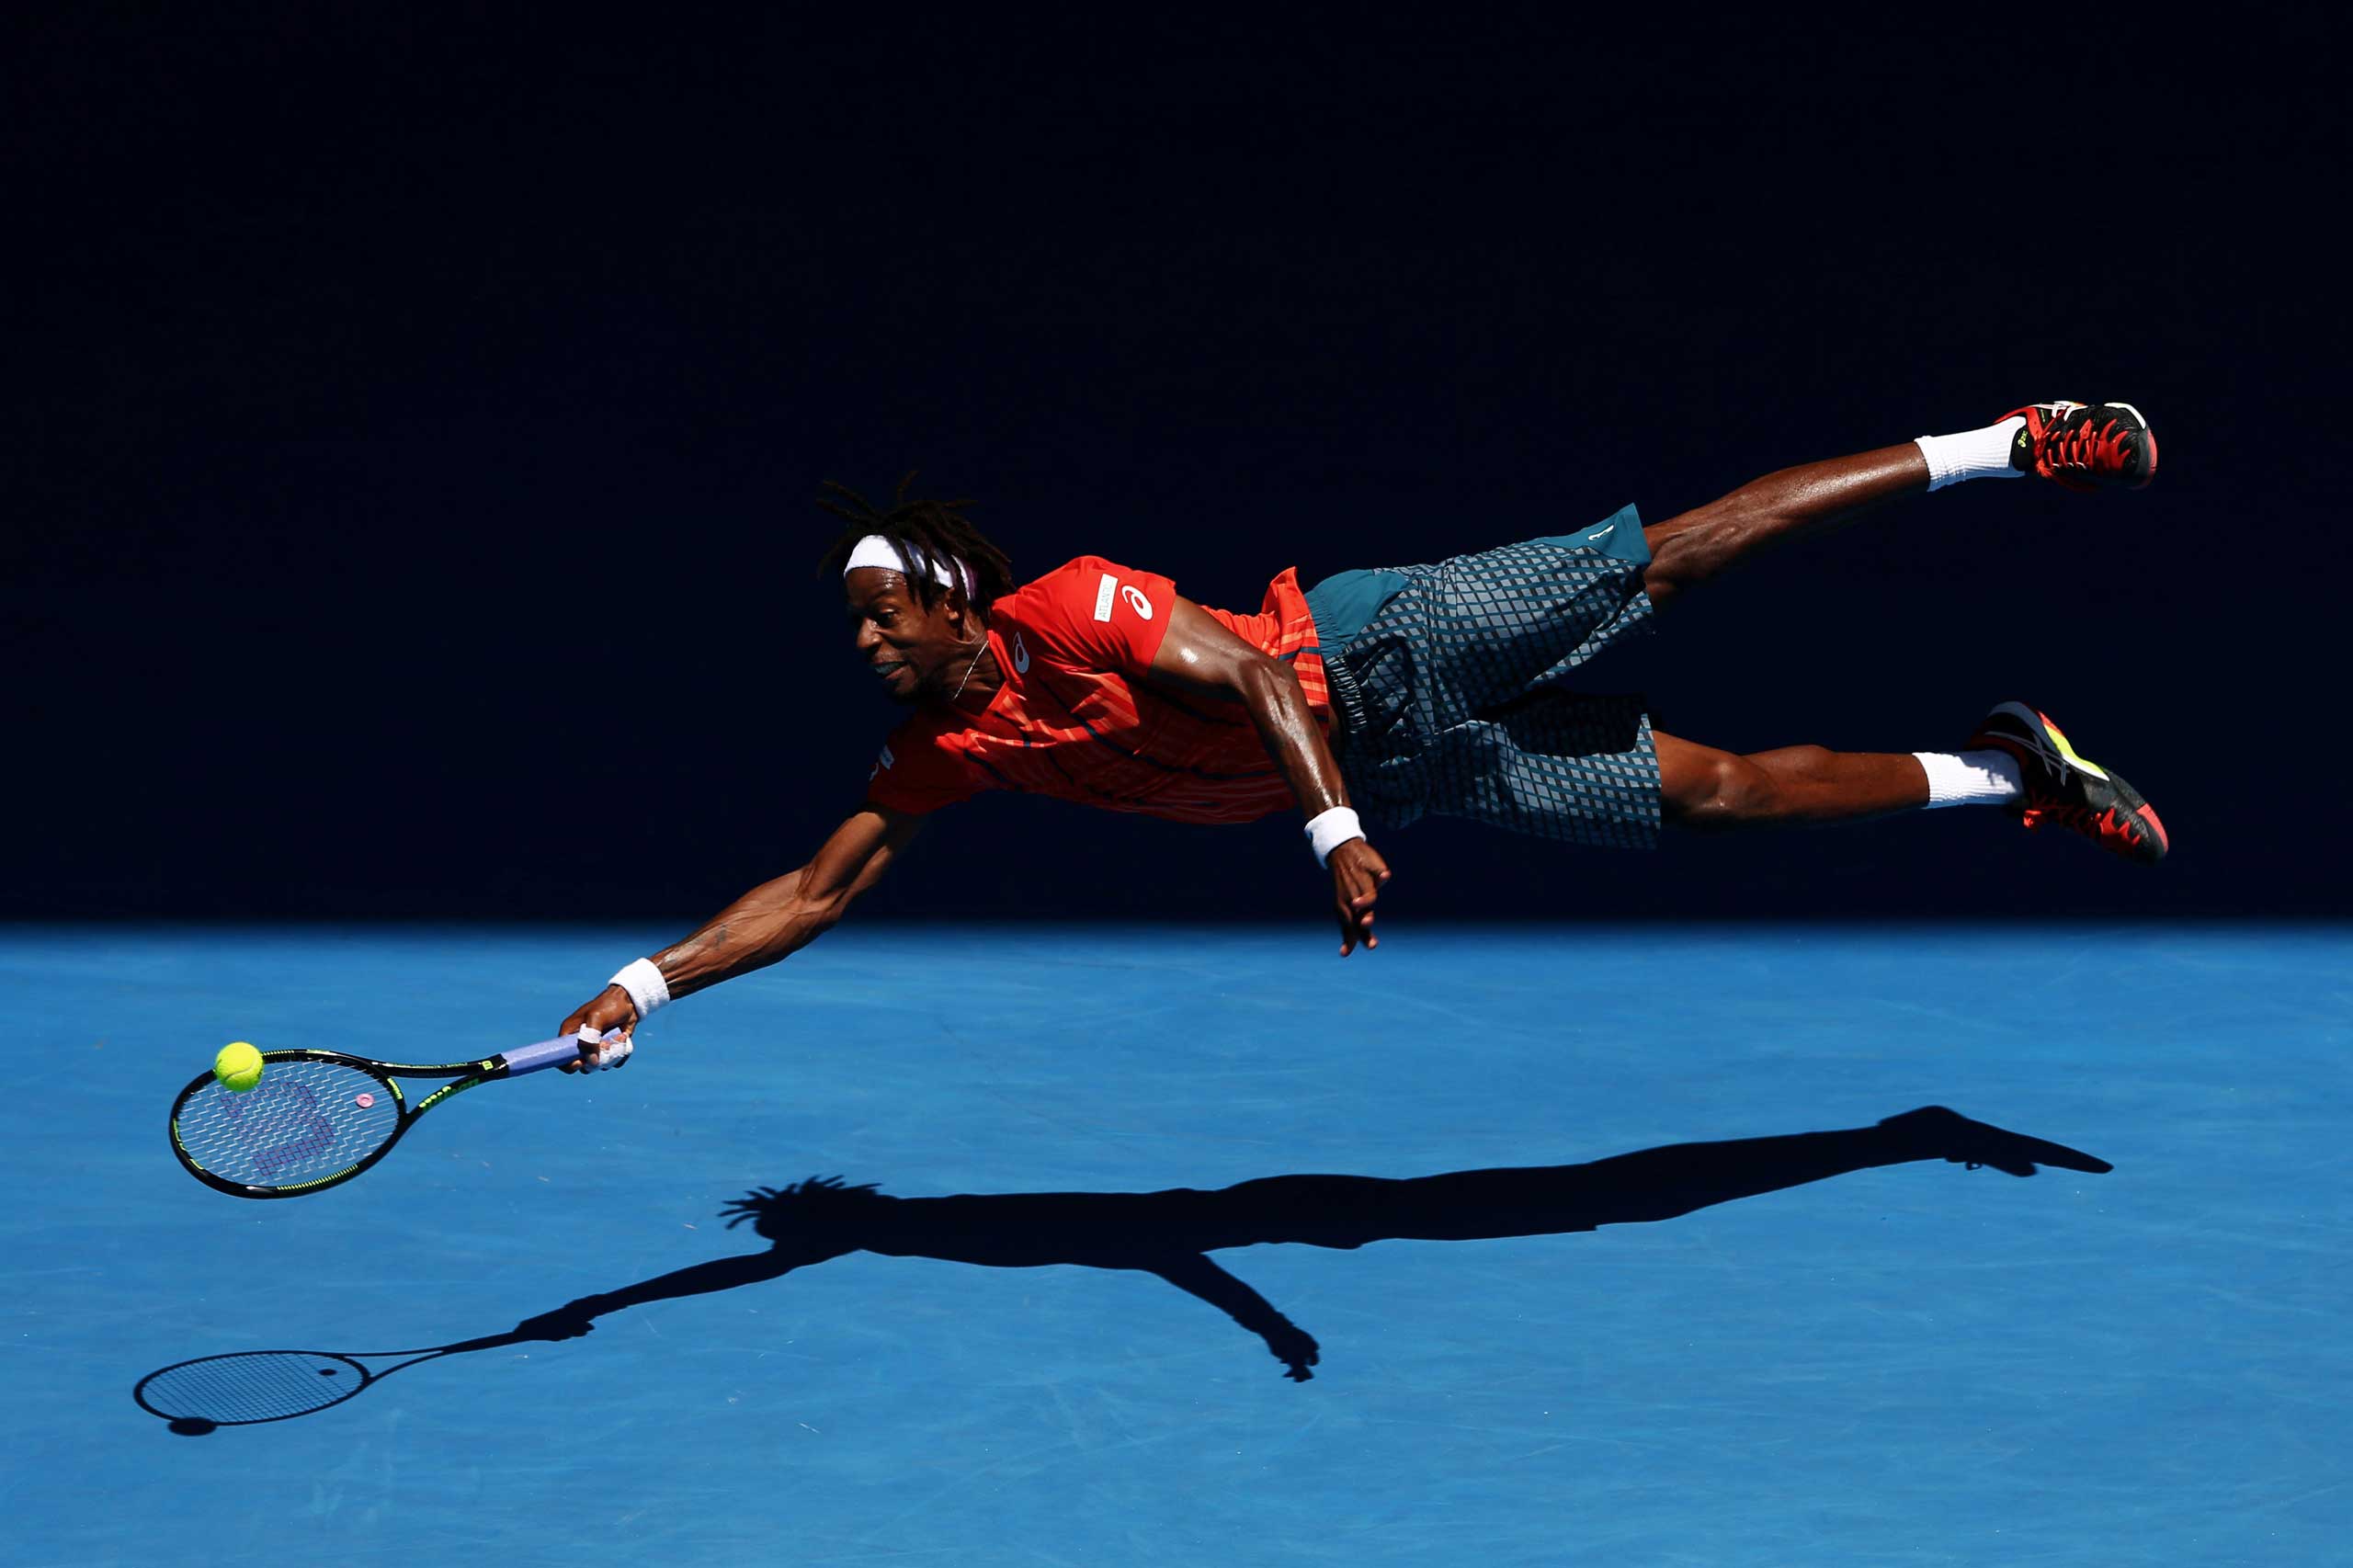 Gael Monfils of France dives for a forehand in his fourth round match against Andrey Kuznestov of Russia, during the 2016 Australian Open at Melbourne Park, Australia, on Jan. 25, 2016.